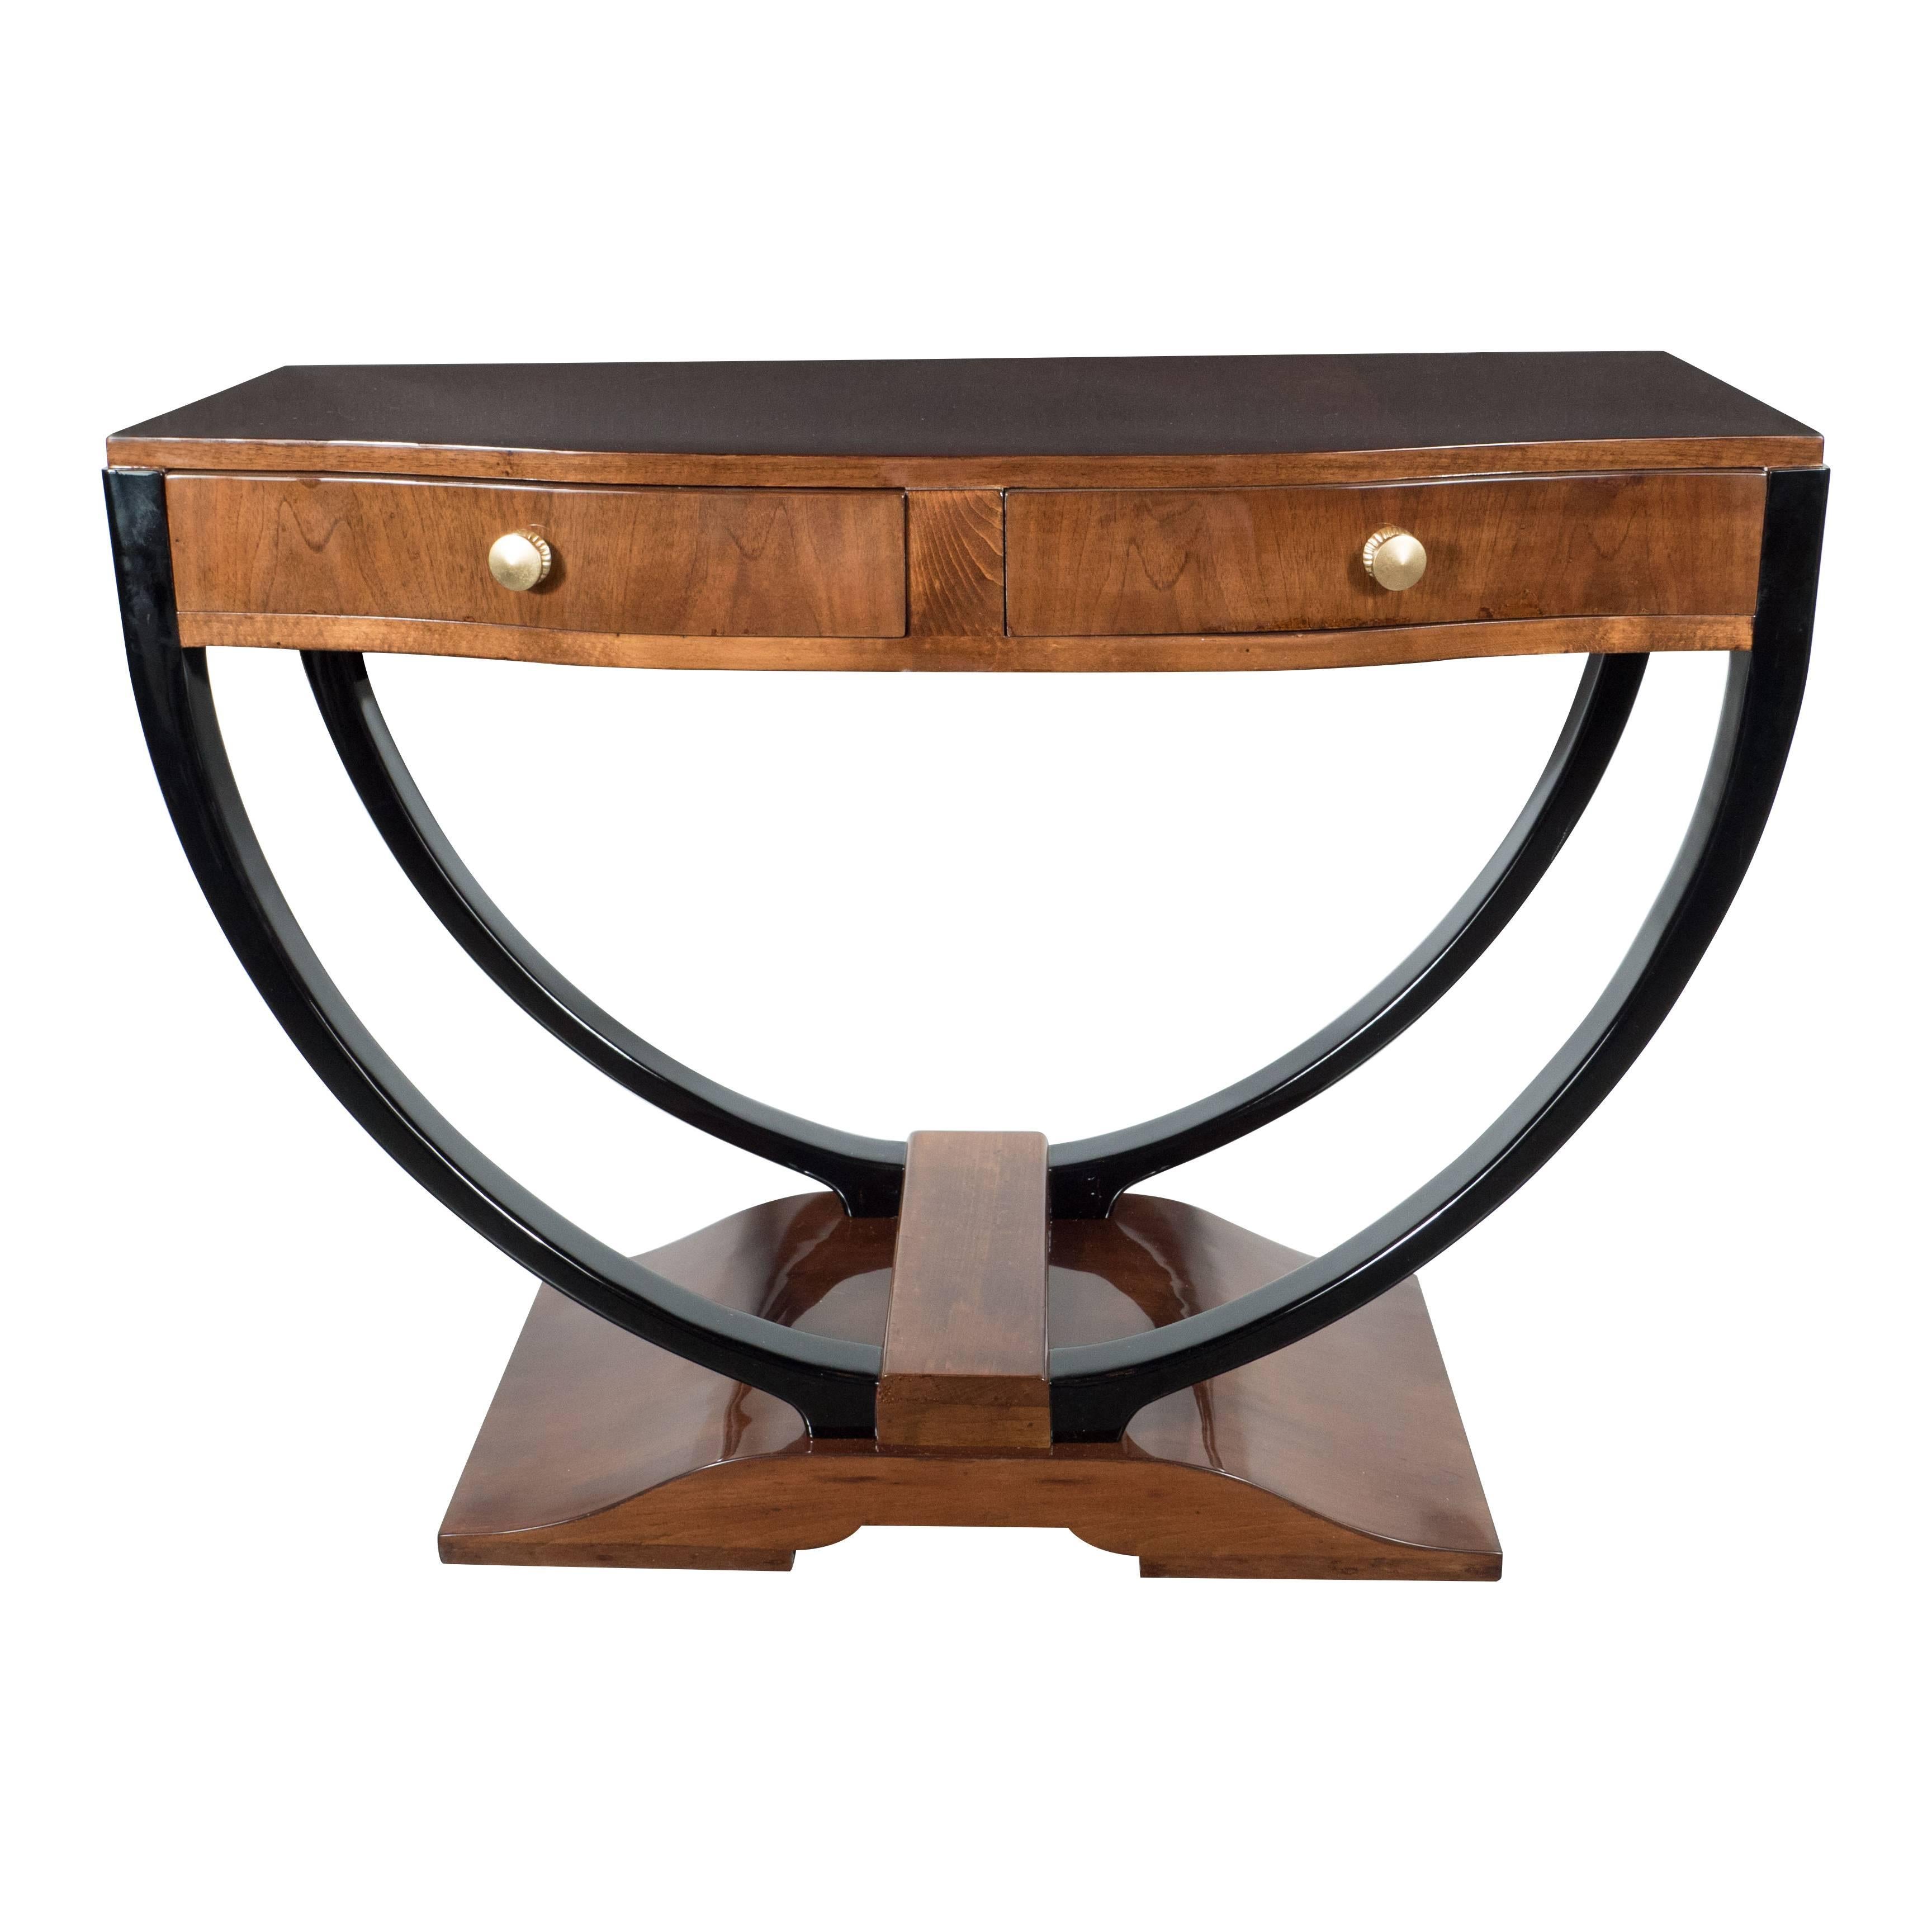 French Art Deco Console in Bookmatched Walnut and Black Lacquer Accents